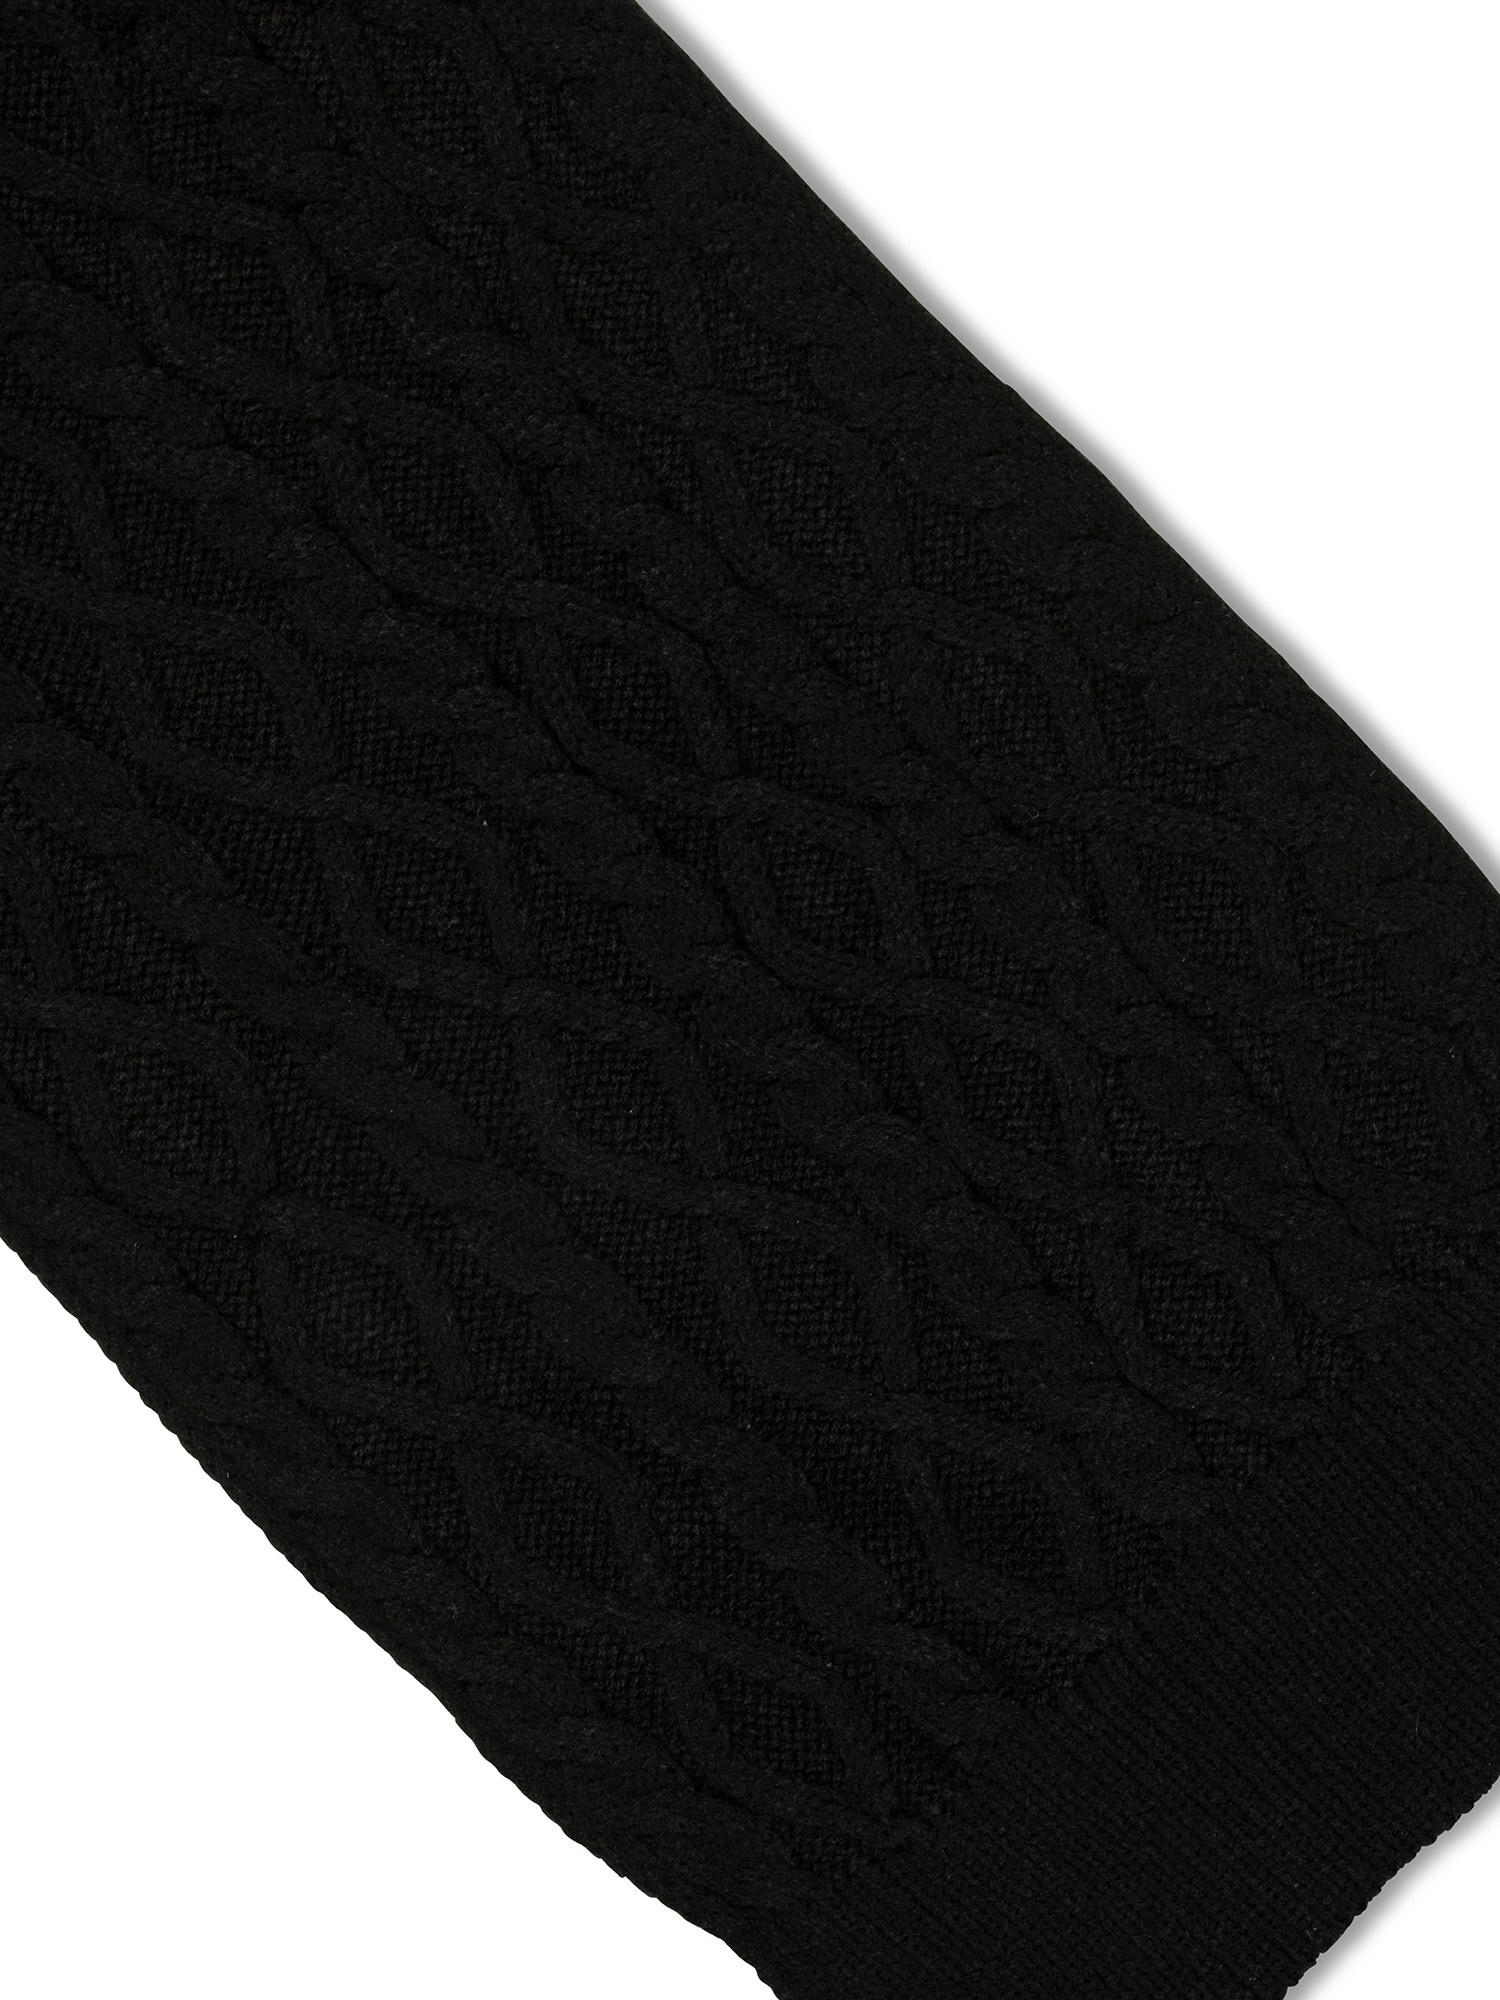 Luca D'Altieri - Scarf with knitted motif, Black, large image number 1